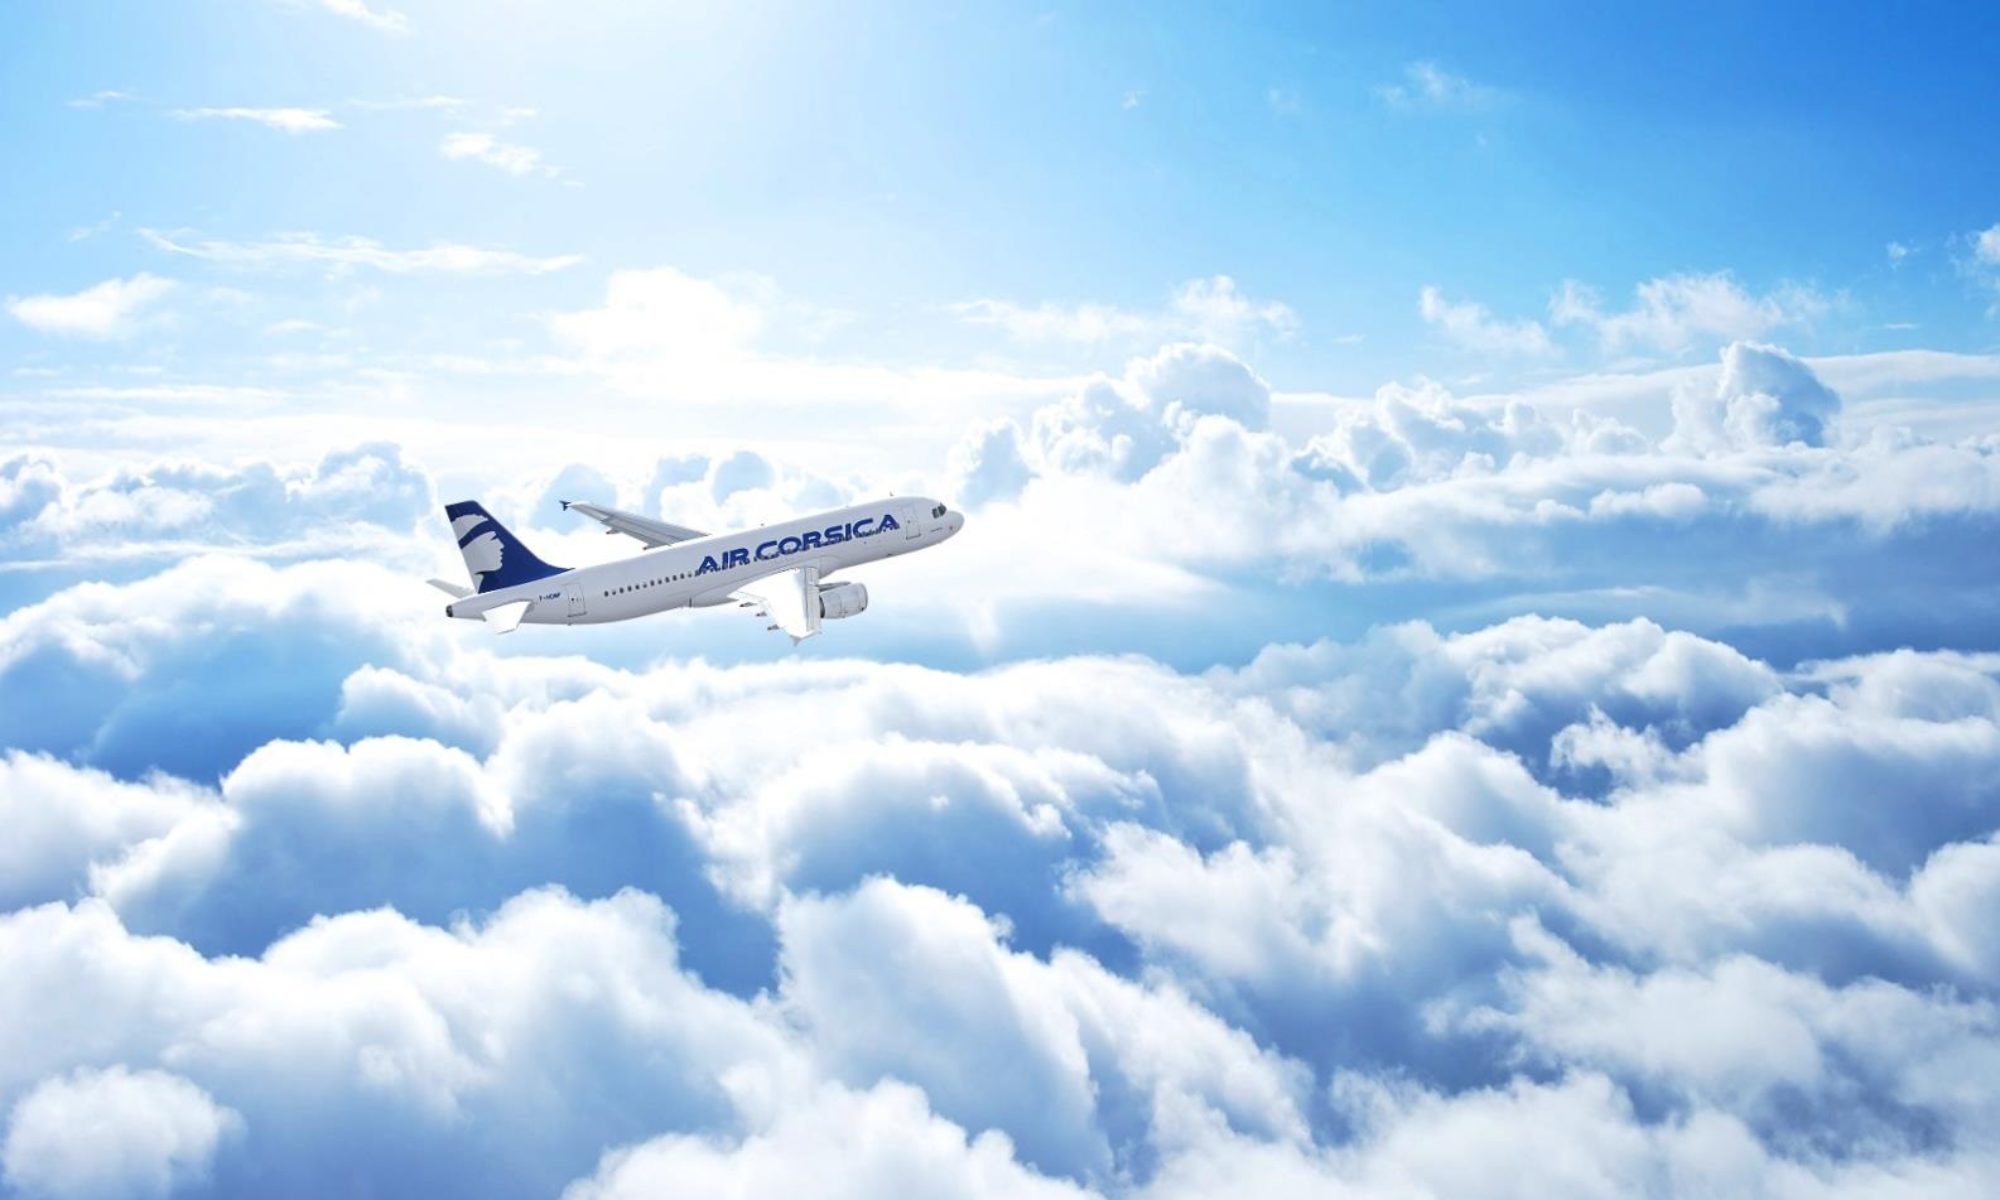 Air Corsica chose Moment to digitalize its in-flight entertainment offer